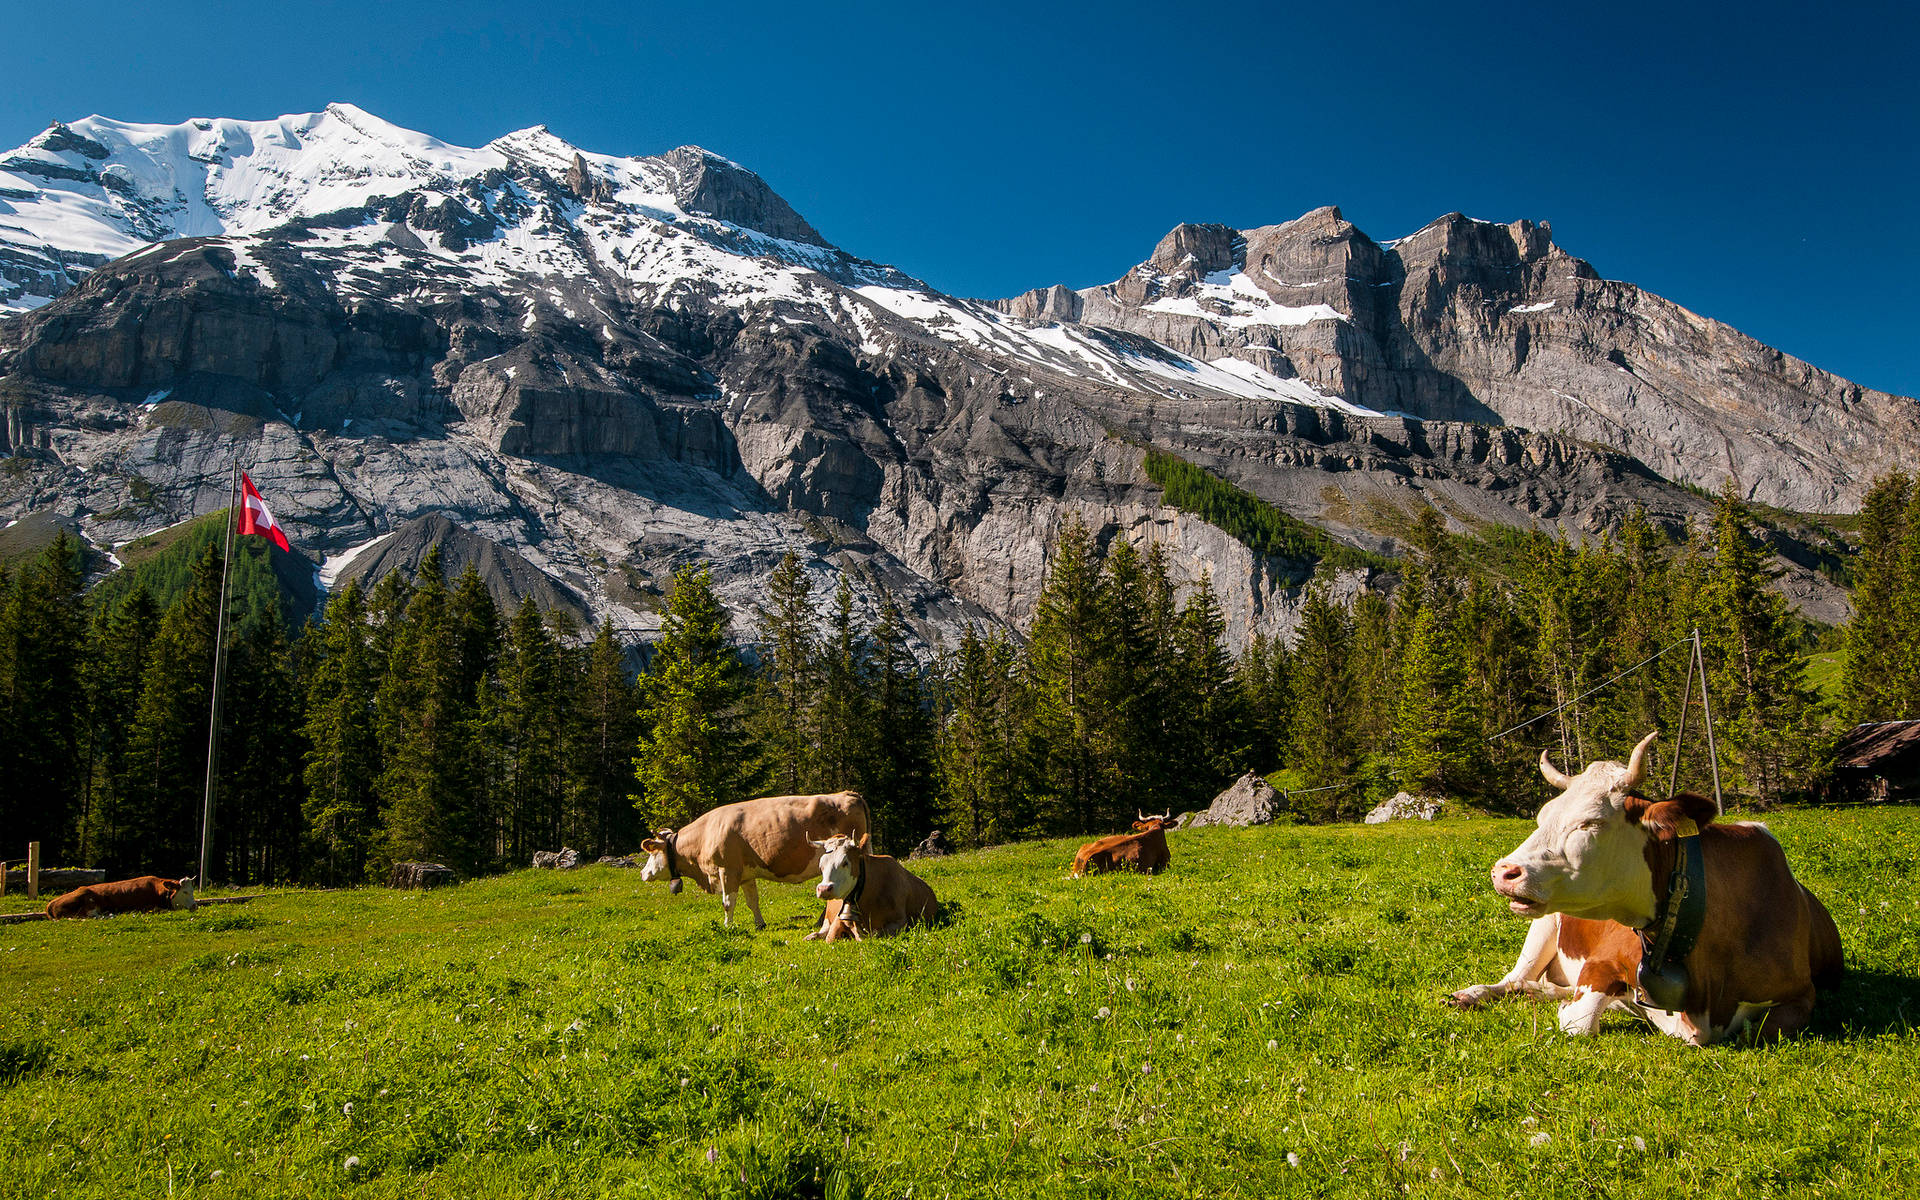 Cute Cows With Amazing Mountain View Background